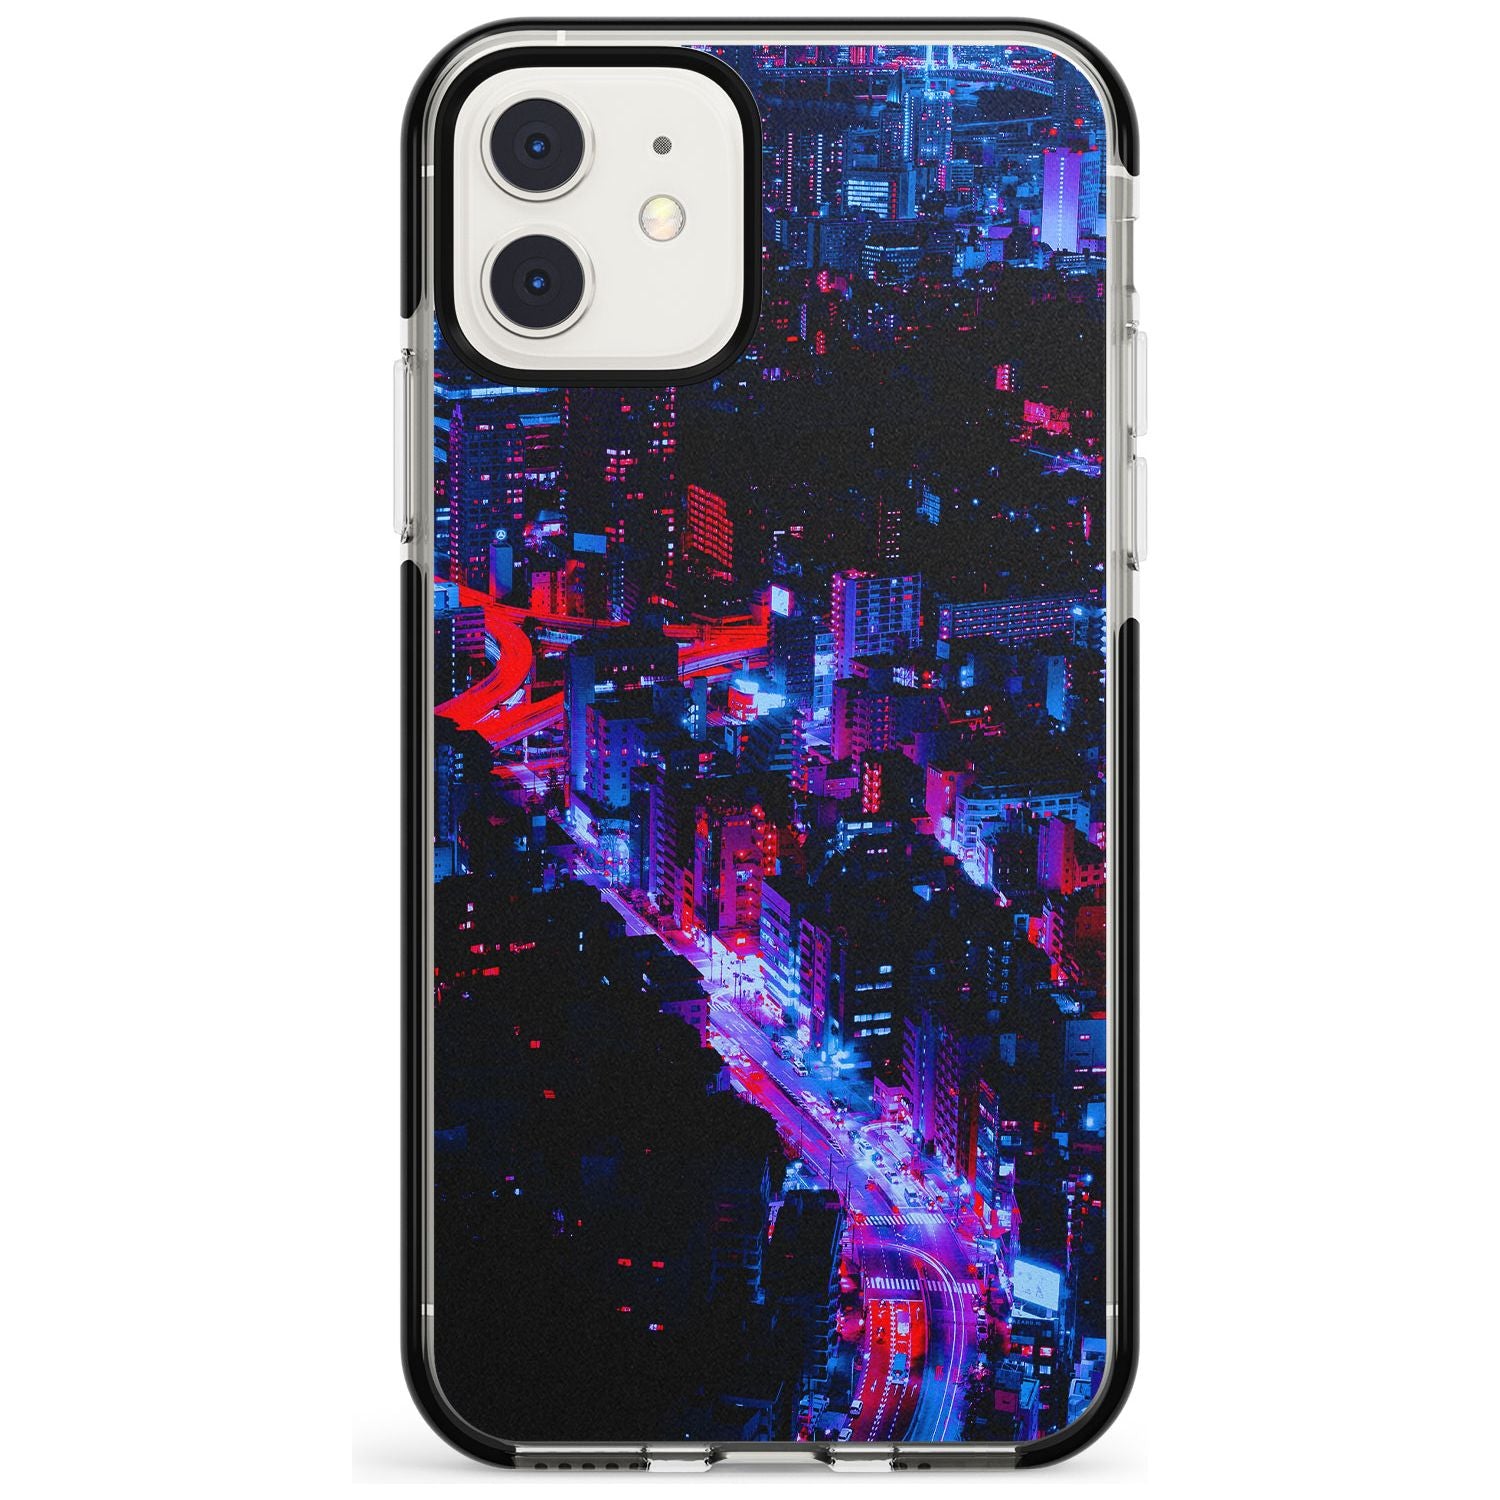 Arial City View - Neon Cities Photographs Black Impact Phone Case for iPhone 11